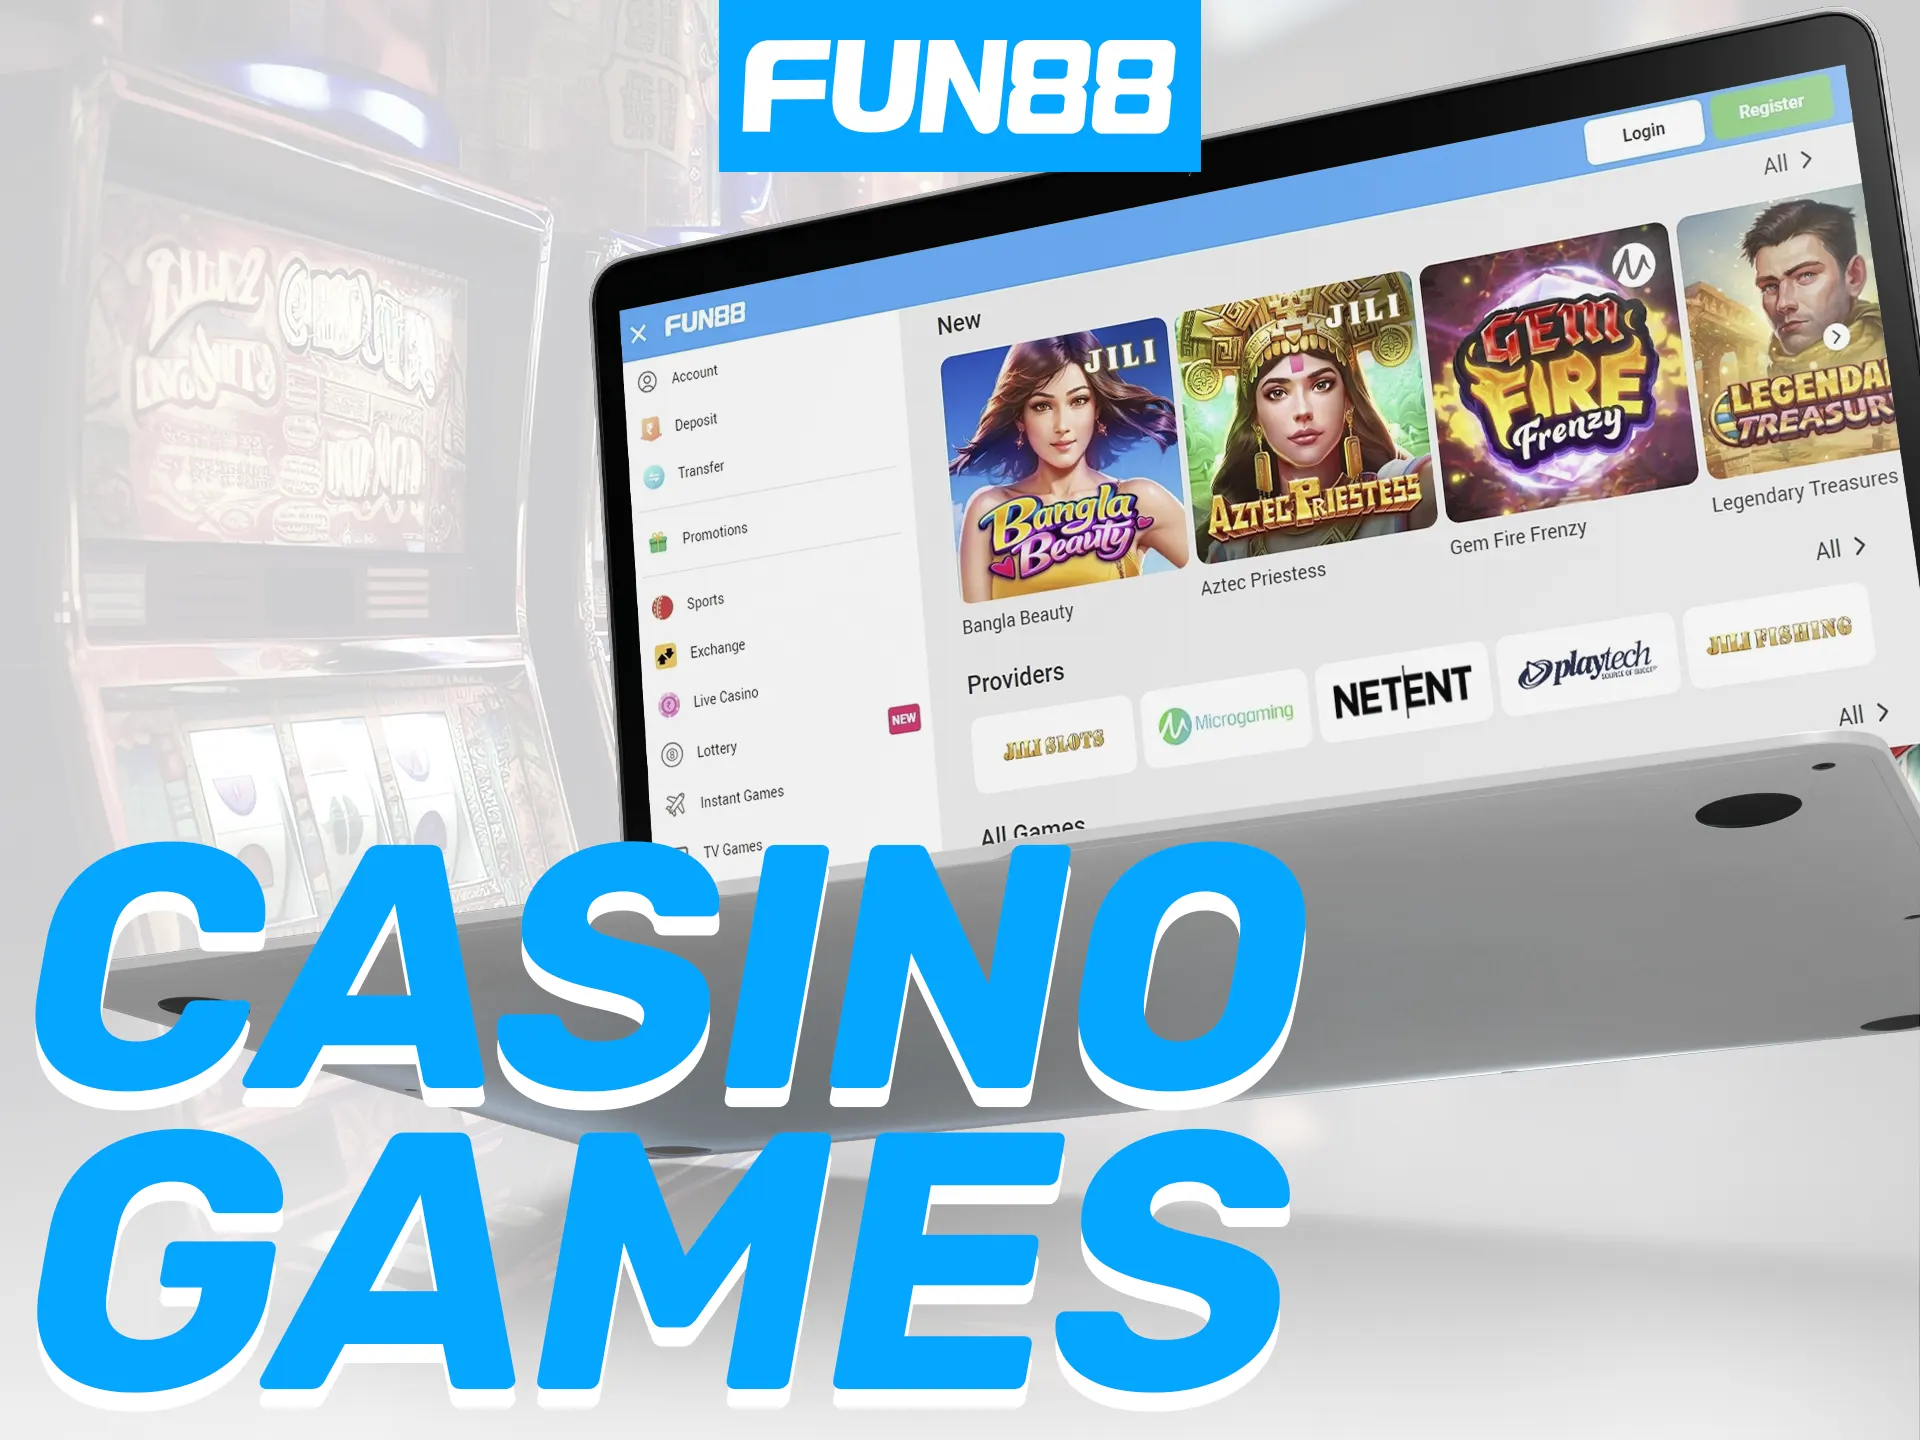 Fun88 offers diverse slots, jackpots, popular titles, and card games in its extensive catalog.